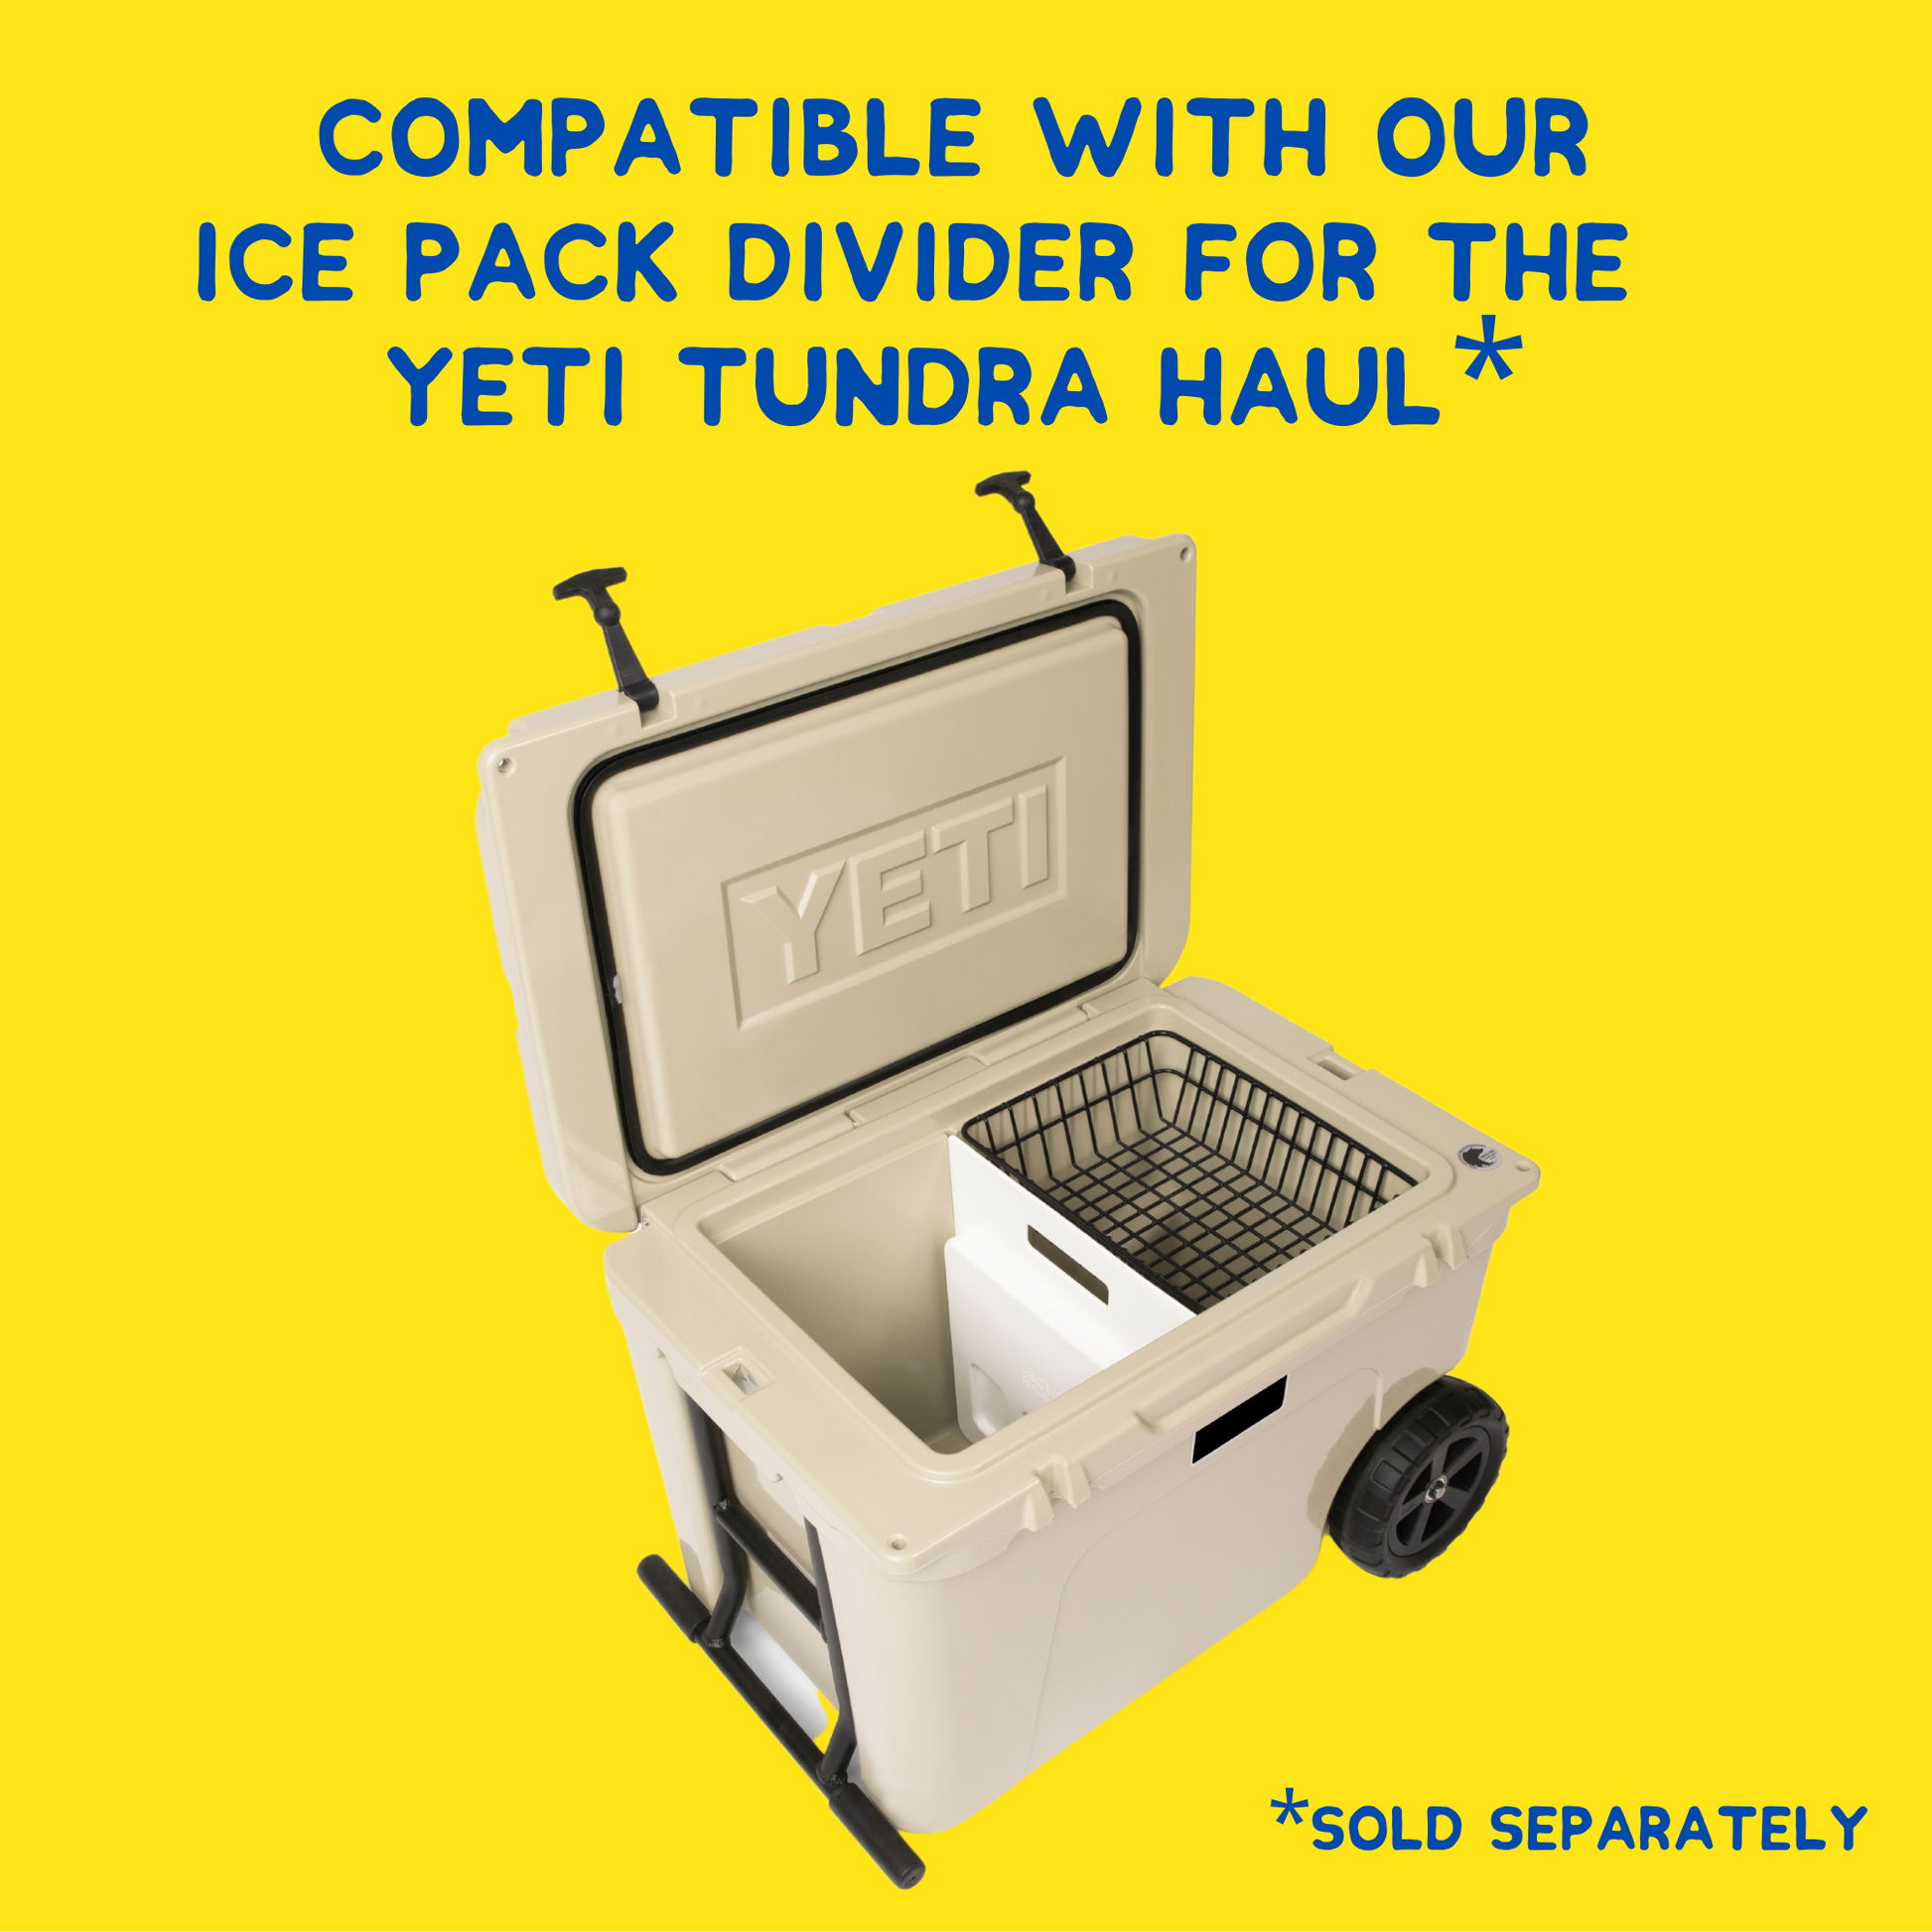 wire basket and divider for the yeti tundra haul wheeled cooler